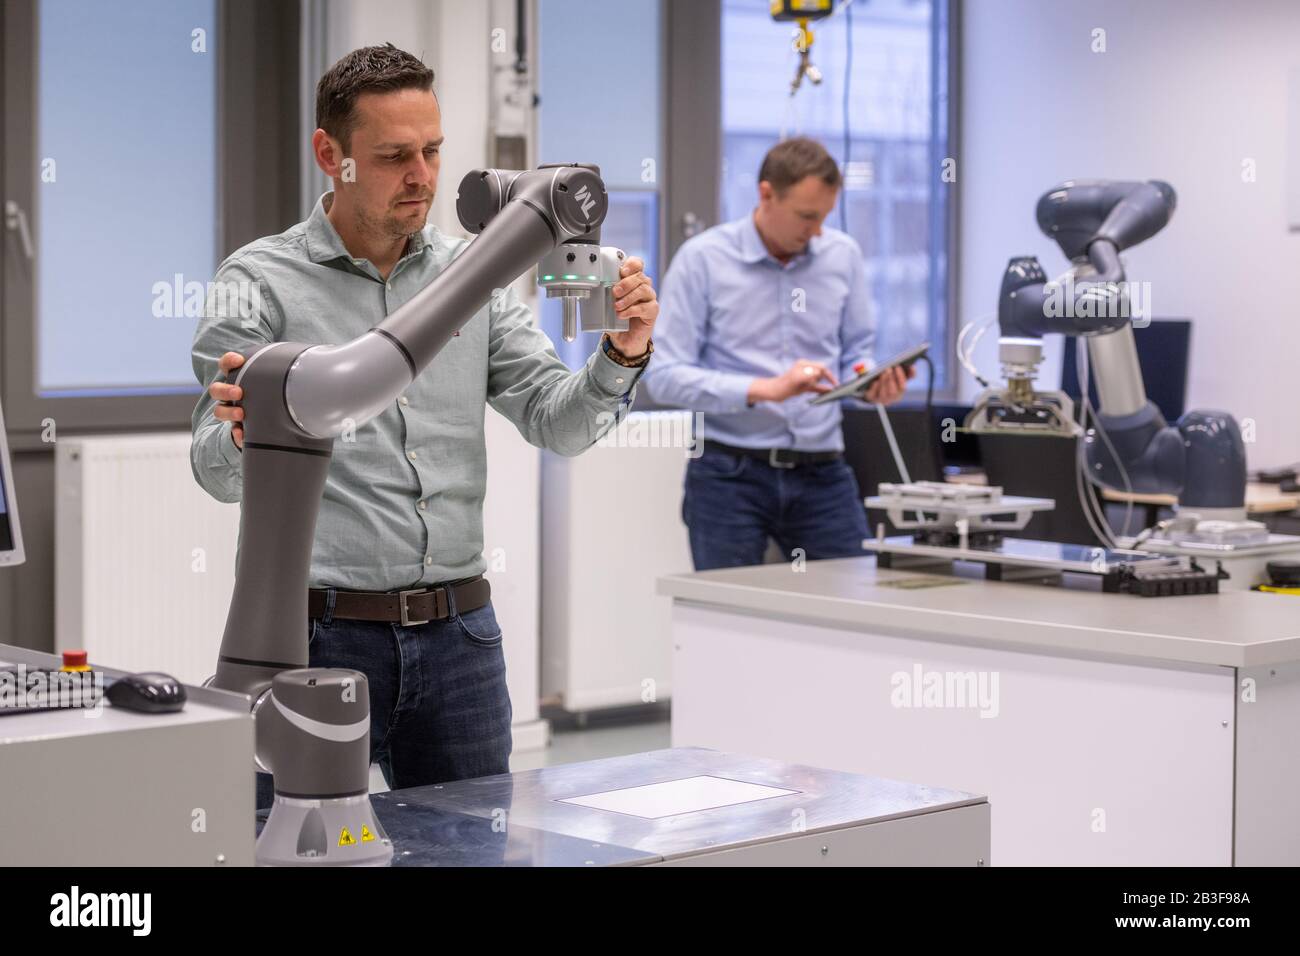 Regensburg, Germany. 27th Feb, 2020. Continental employees test the  capabilities and functions of new robots in the "Test Center Robotics" at  Continental's plant. The automotive supplier will present its figures for  the